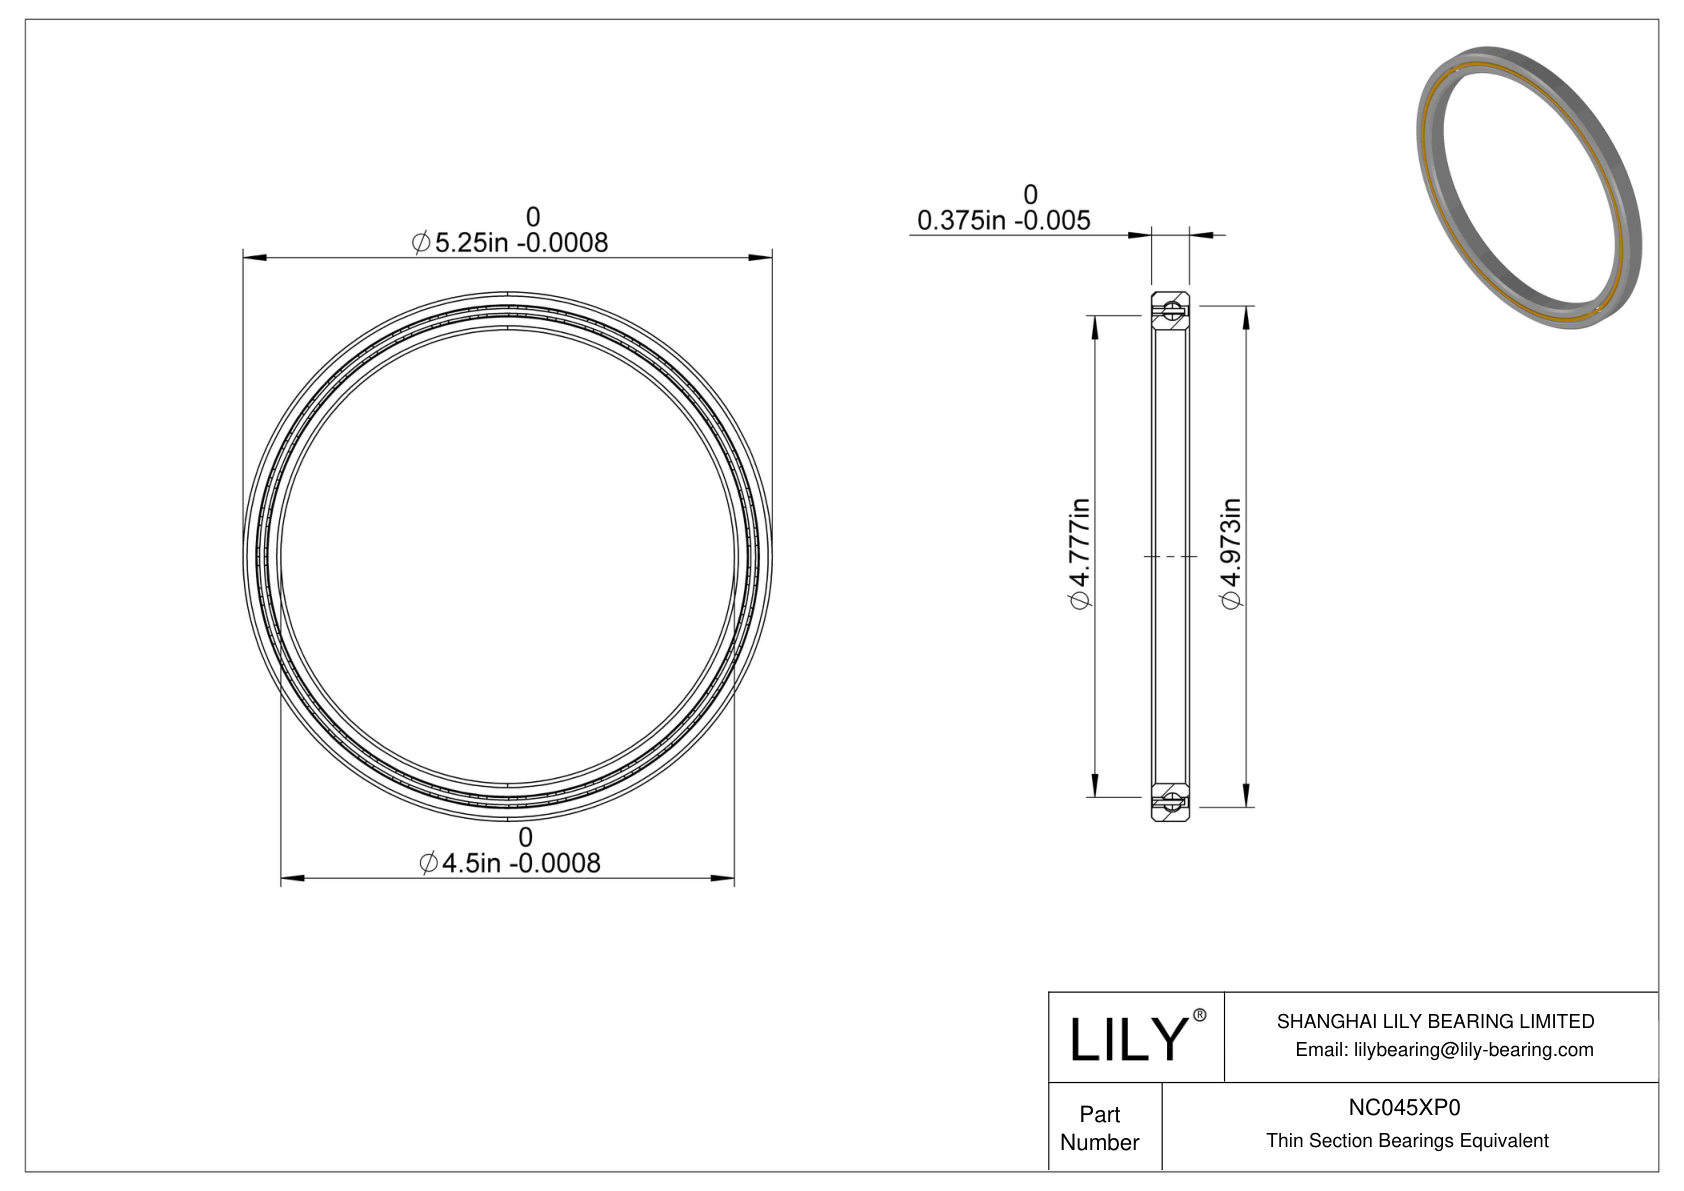 NC045XP0 Constant Section (CS) Bearings cad drawing